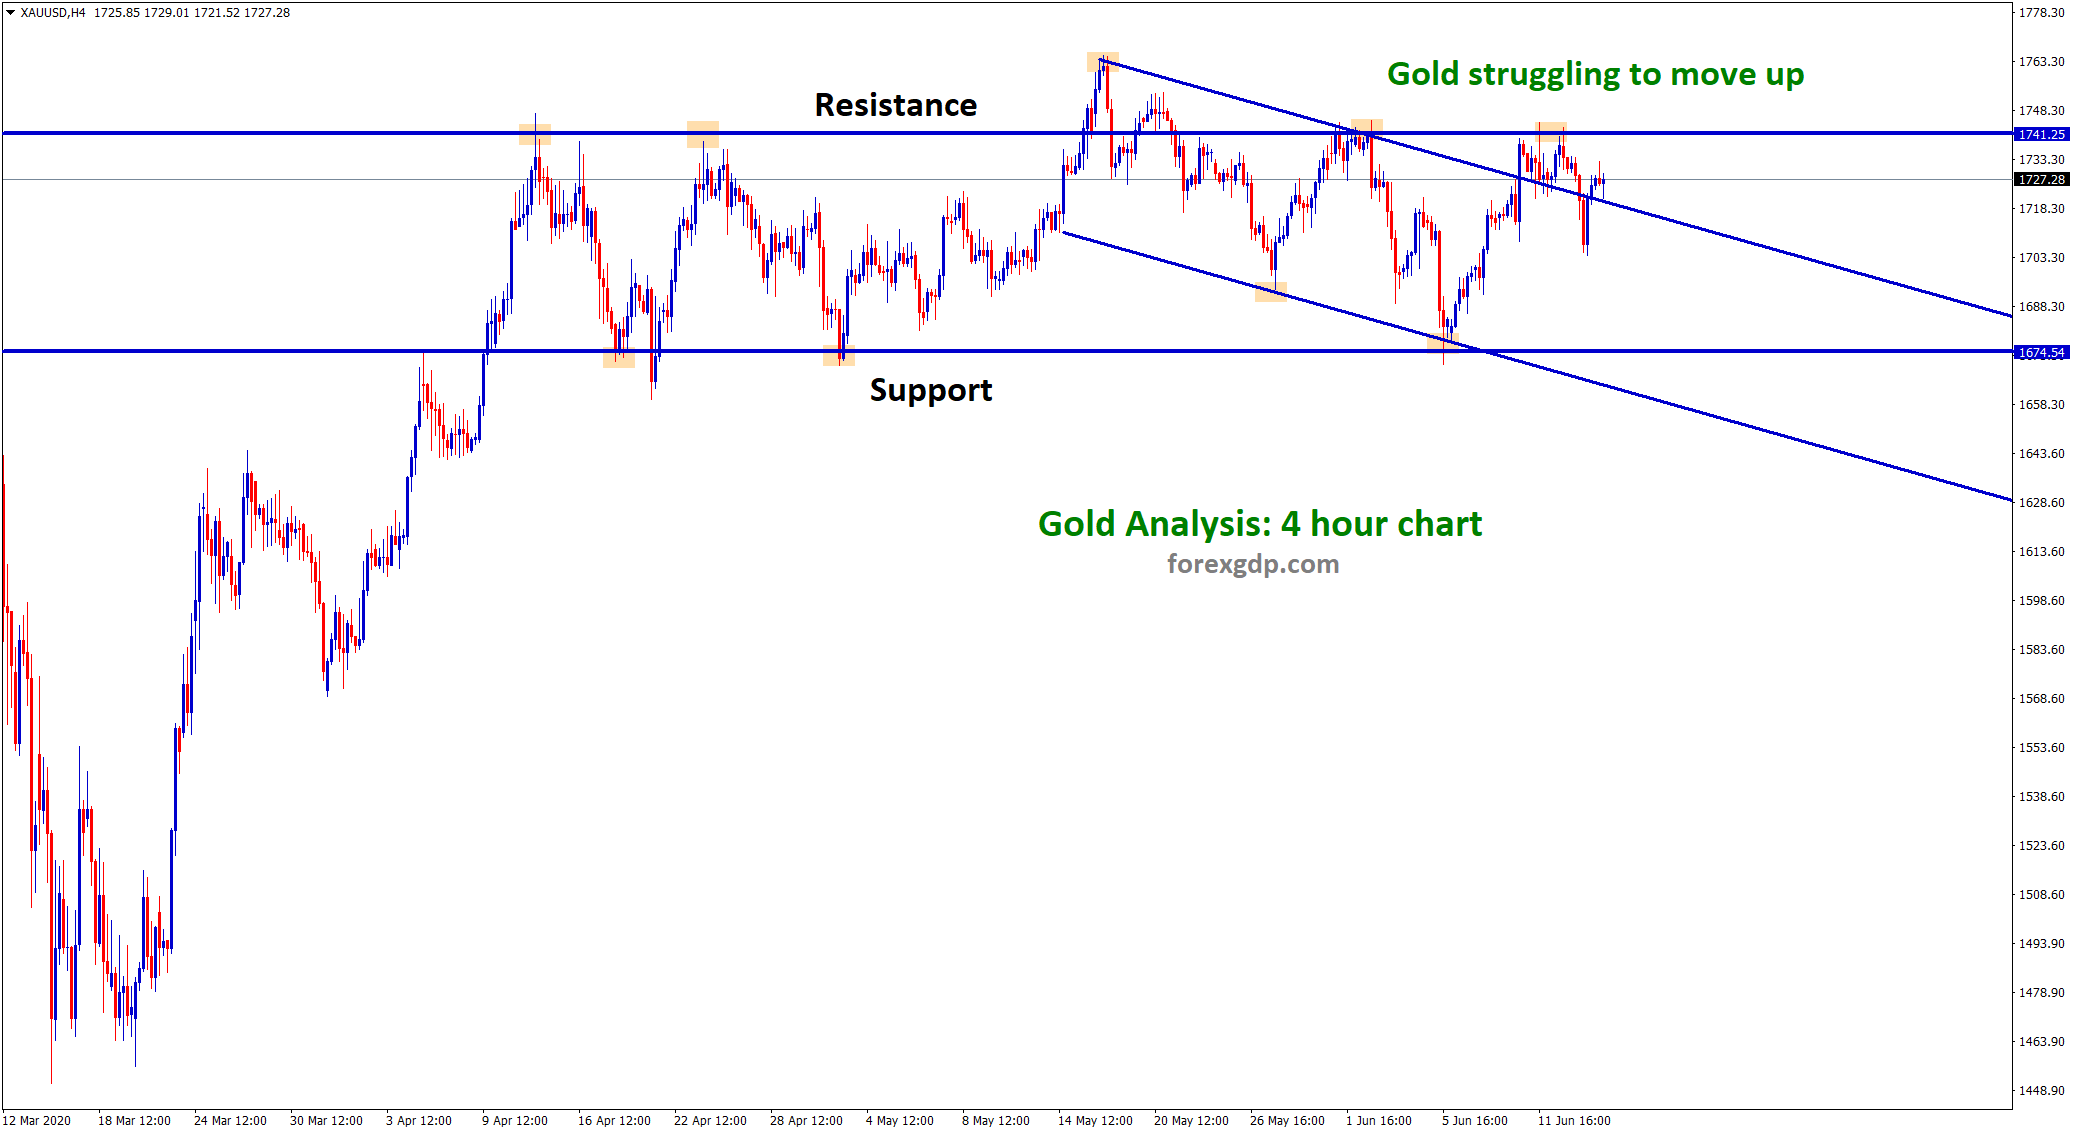 gold struggling to move up in h4